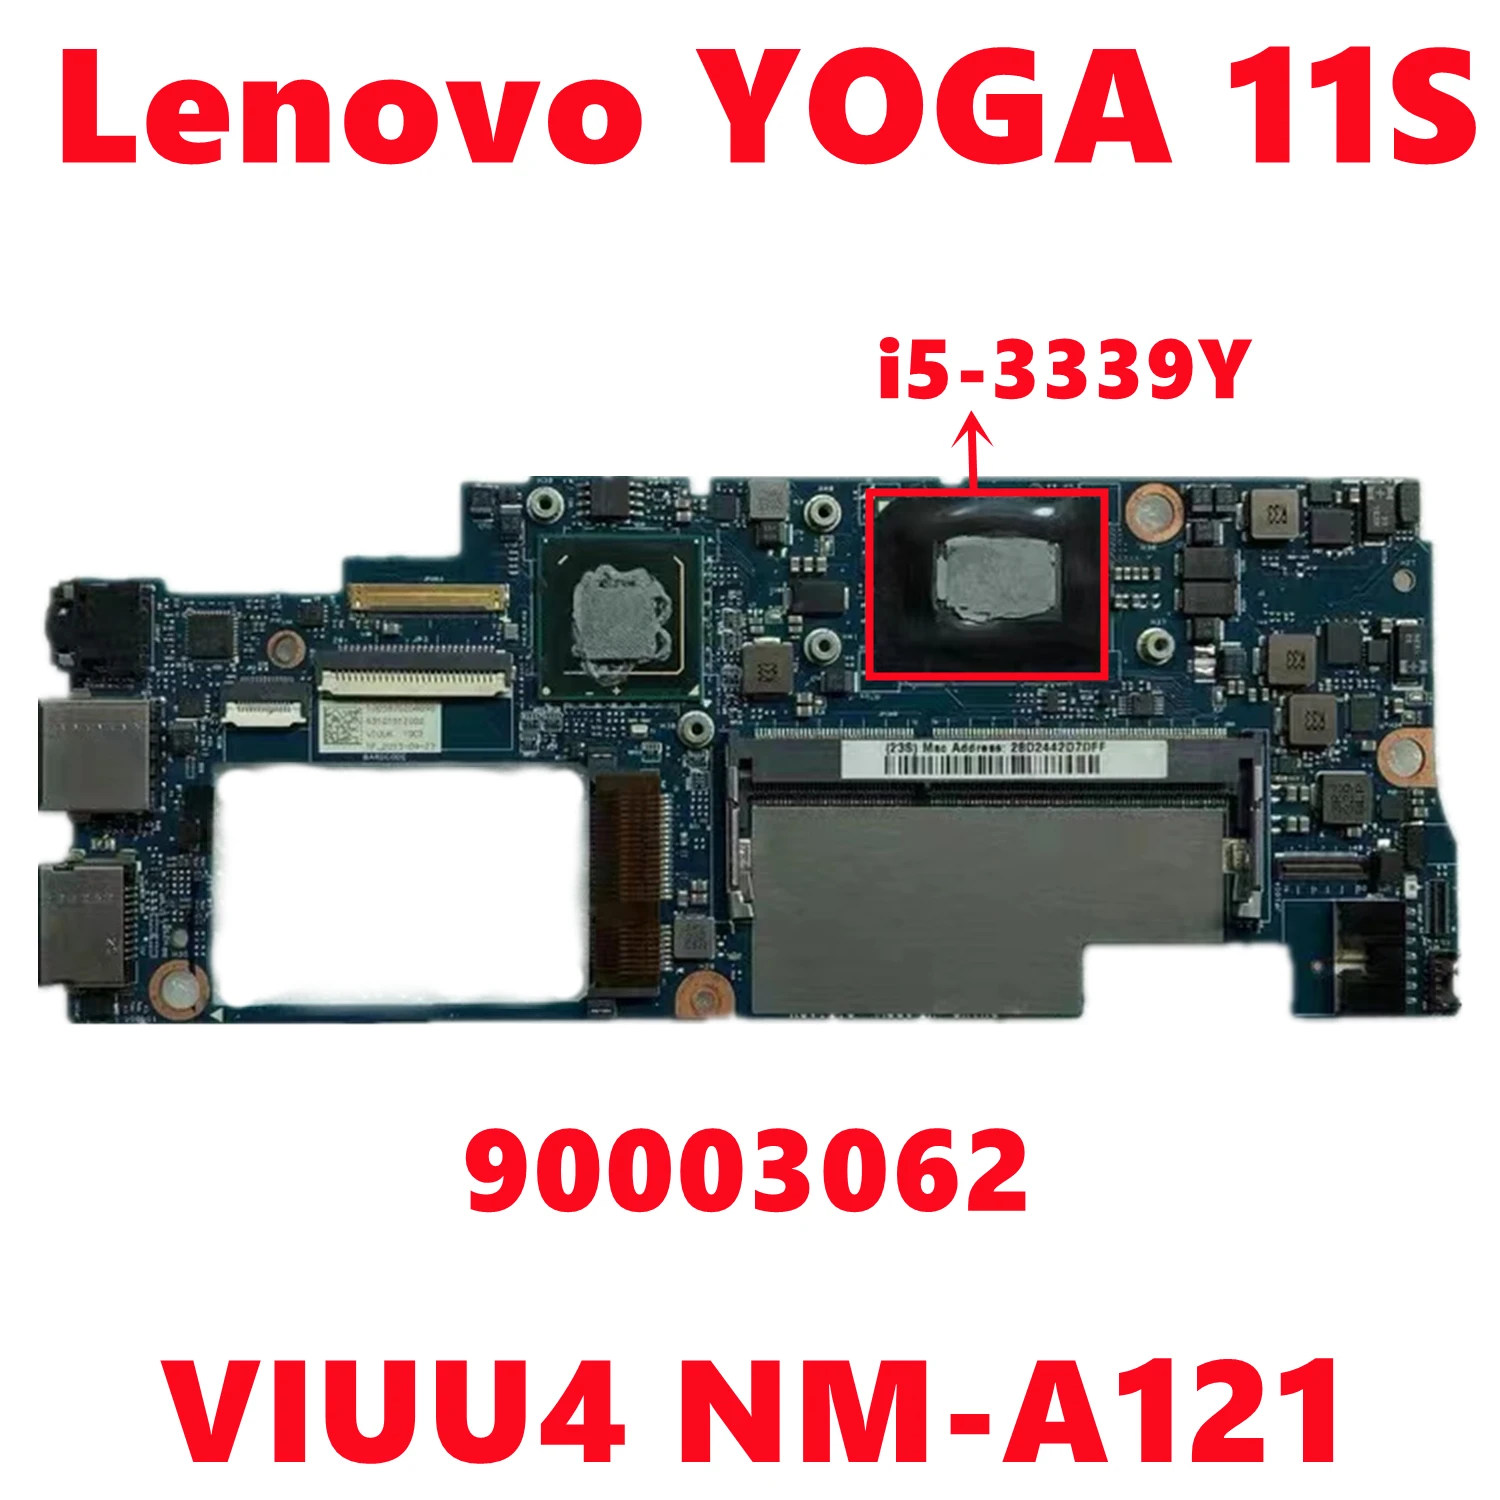 

FRU:90003062 Mainboard For Lenovo YOGA 11S Laptop Motherboard VIUU4 NM-A121 With i5-3339Y CPU DDR3 100% Test working